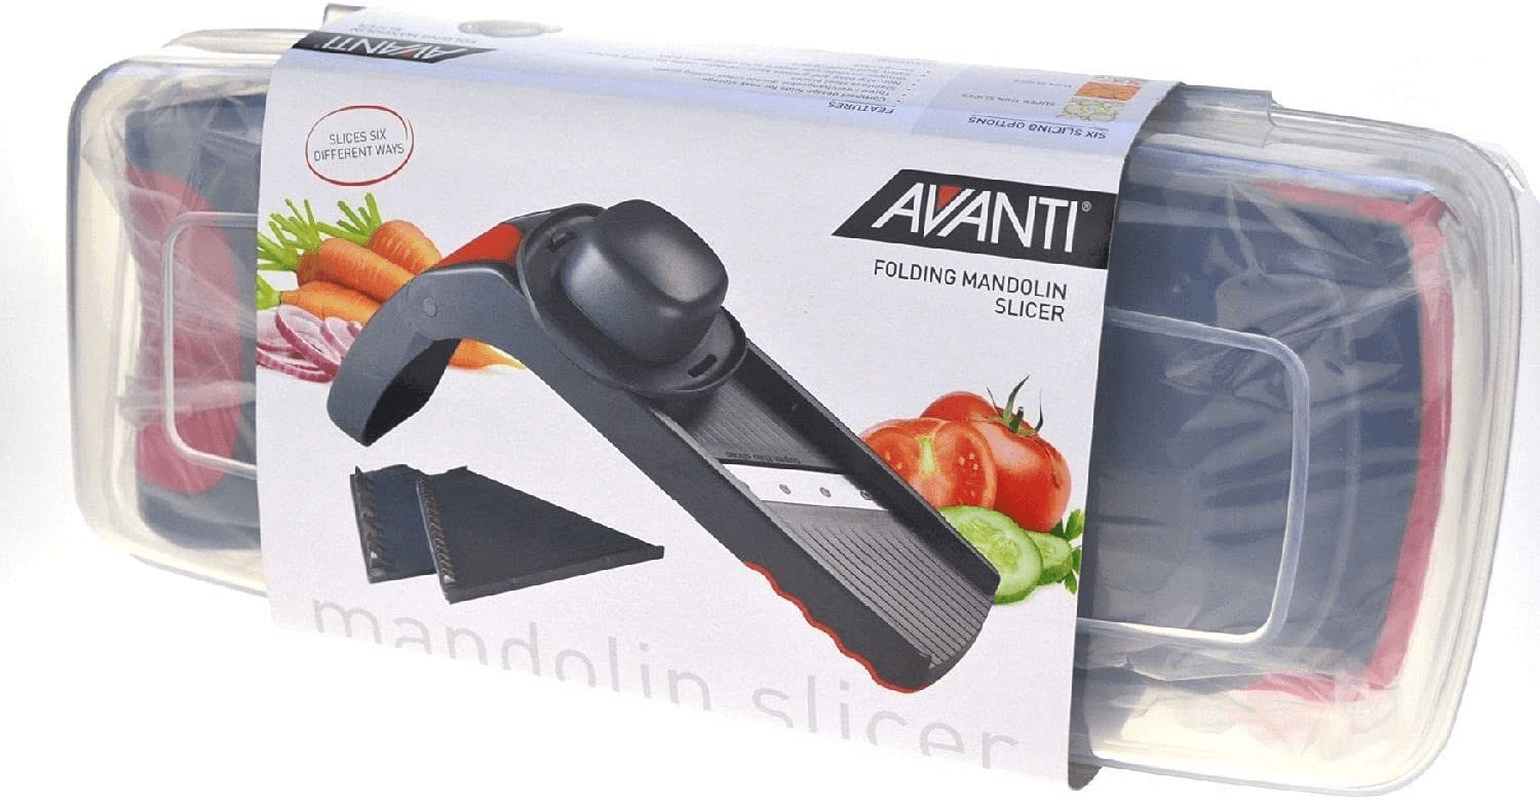 Avanti 12636 Mandolin Slicer with 5 Cutting Blades and Storage Box for sale online